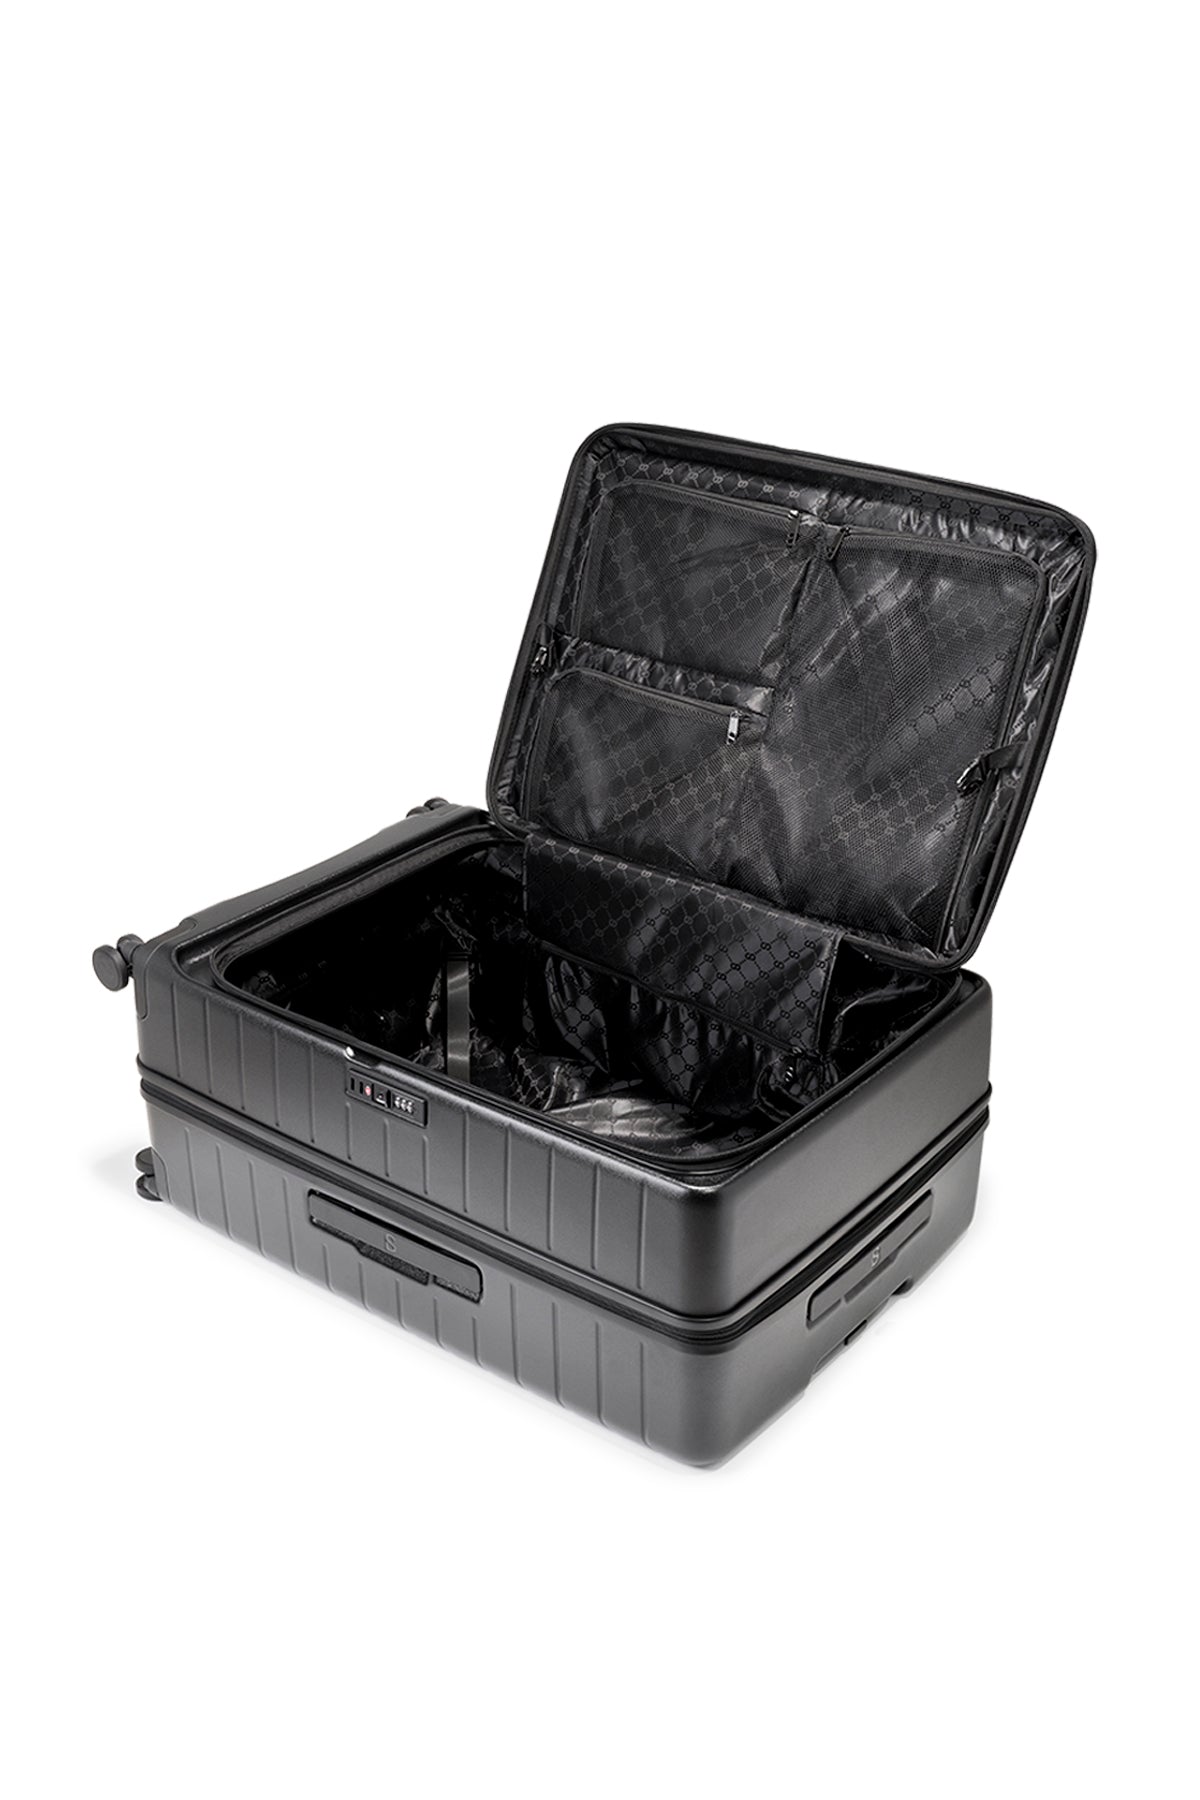 Check-in Luggage 26"" - Black